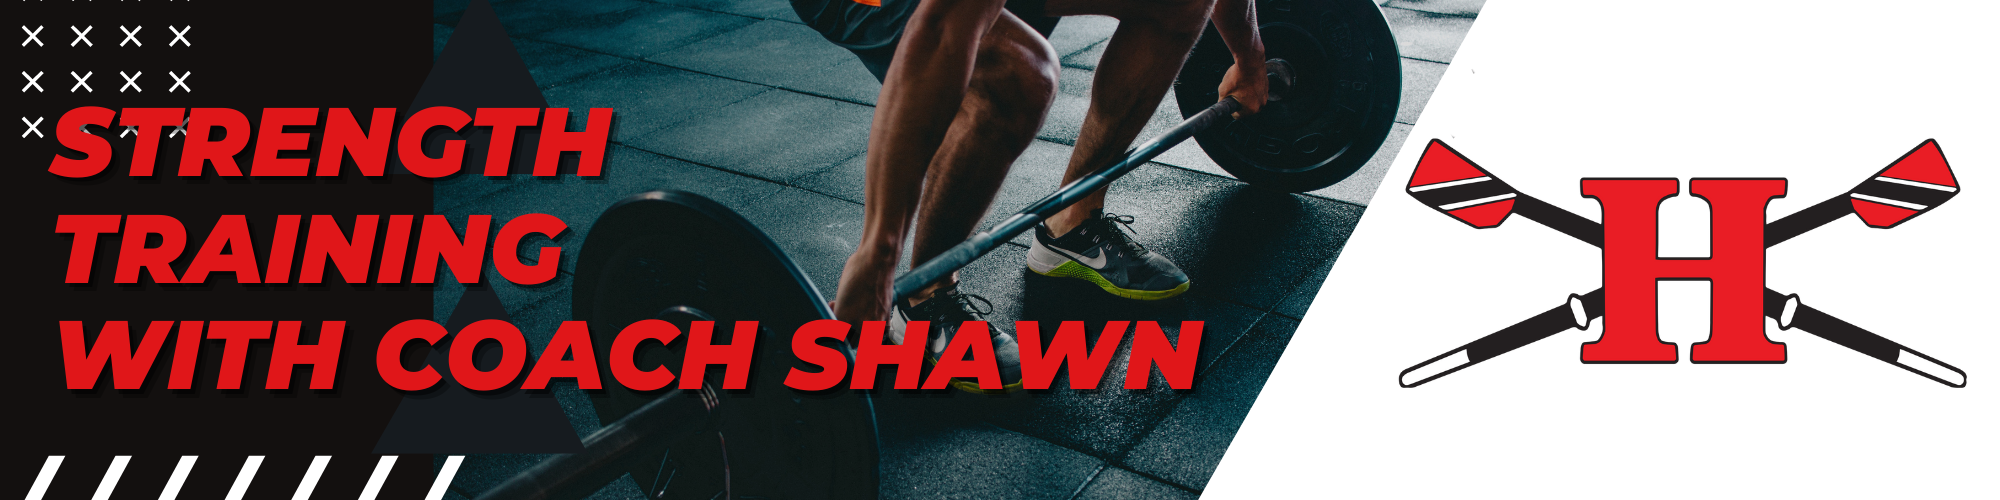 Strength Training with Coach Shawn join now (2)